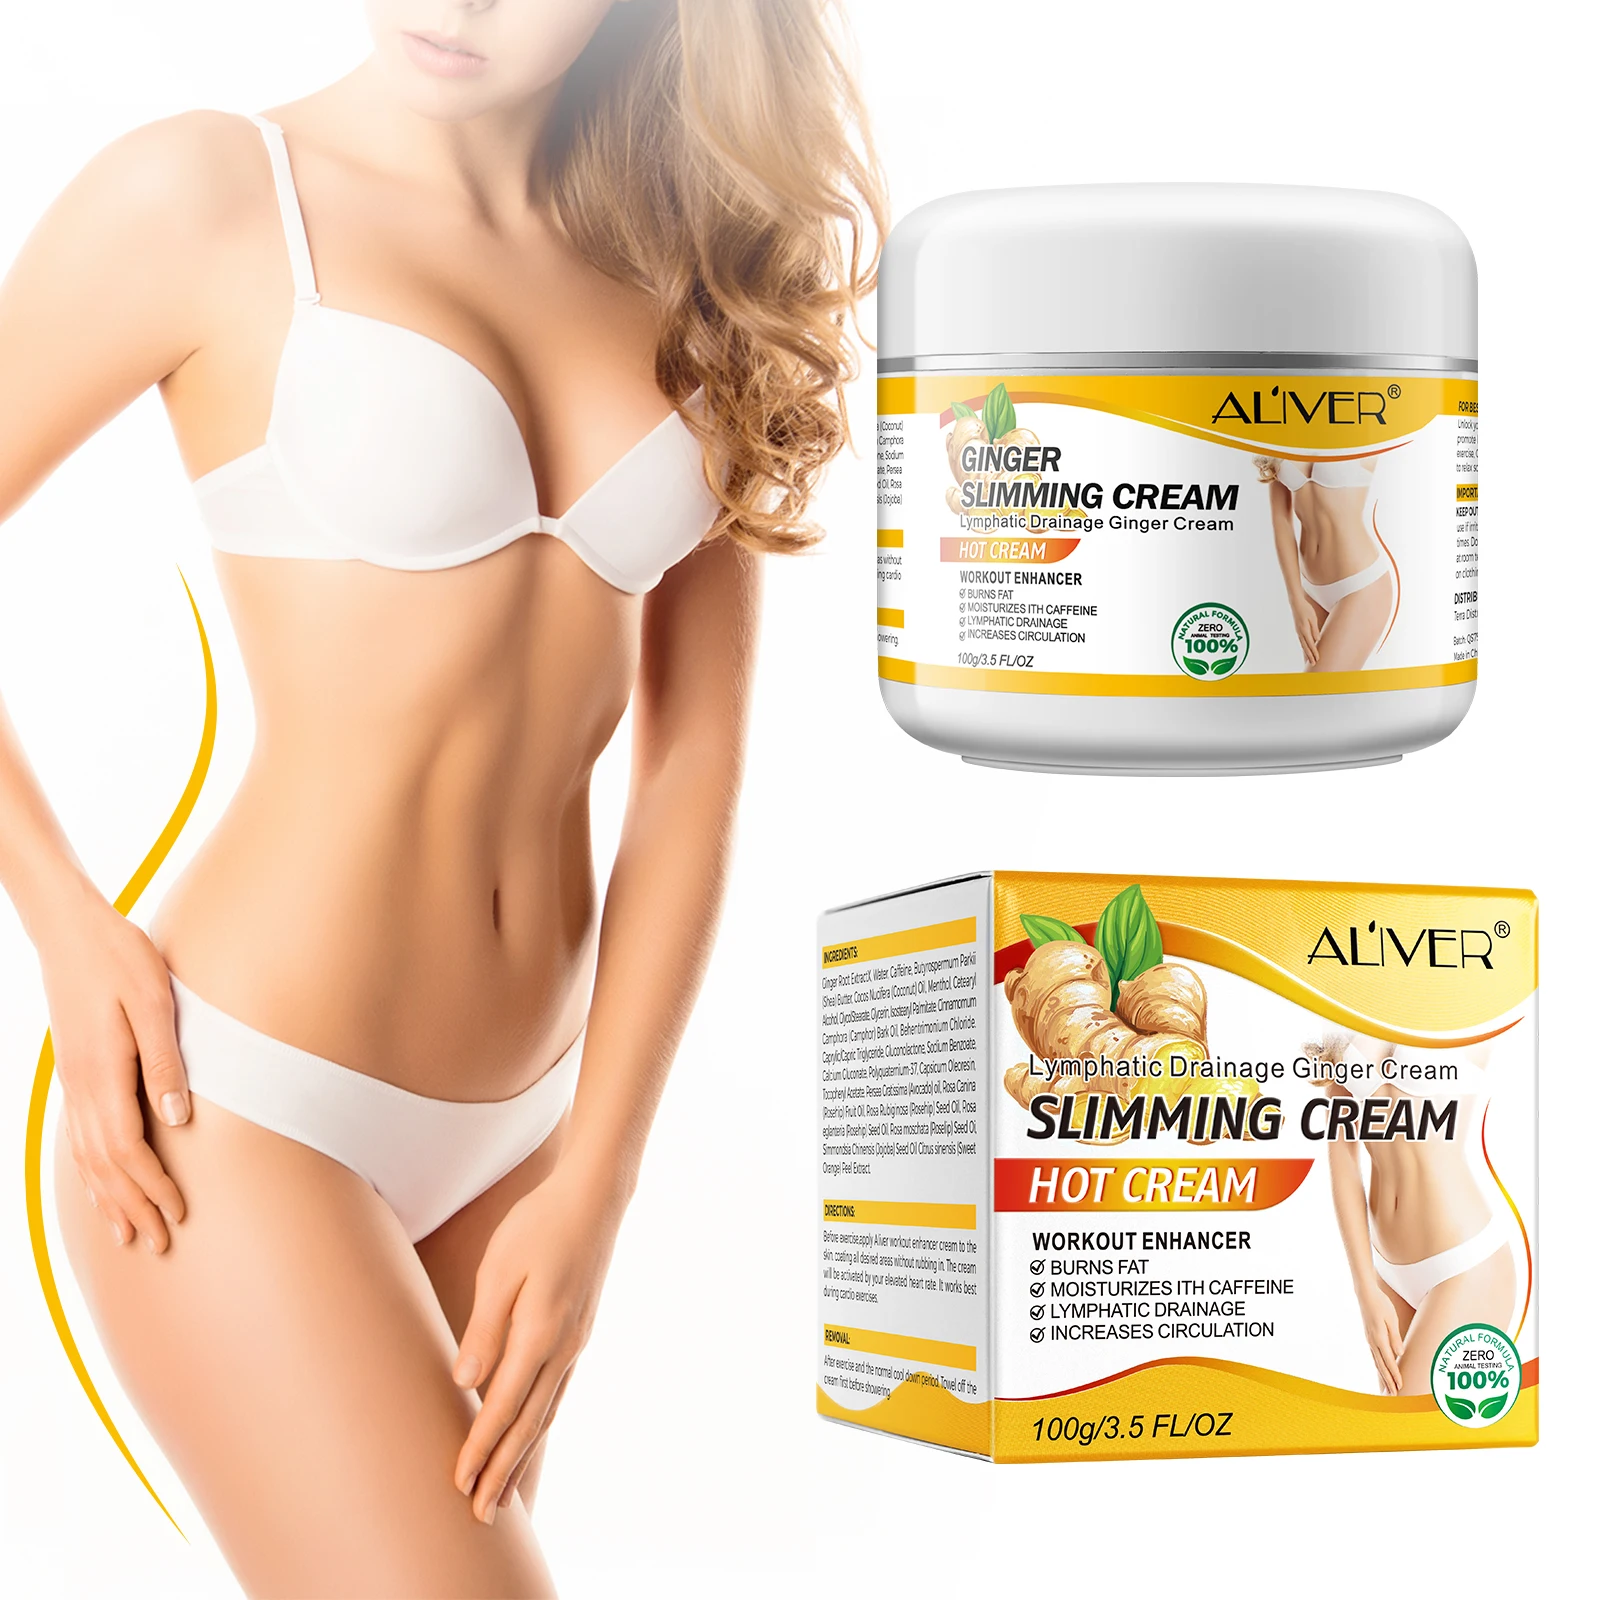 

ALIVER Wholesale Smoothing Relaxing Anti Cellulite Fat Burning Belly Body Slim Weight Loss Ginger Slimming Cream